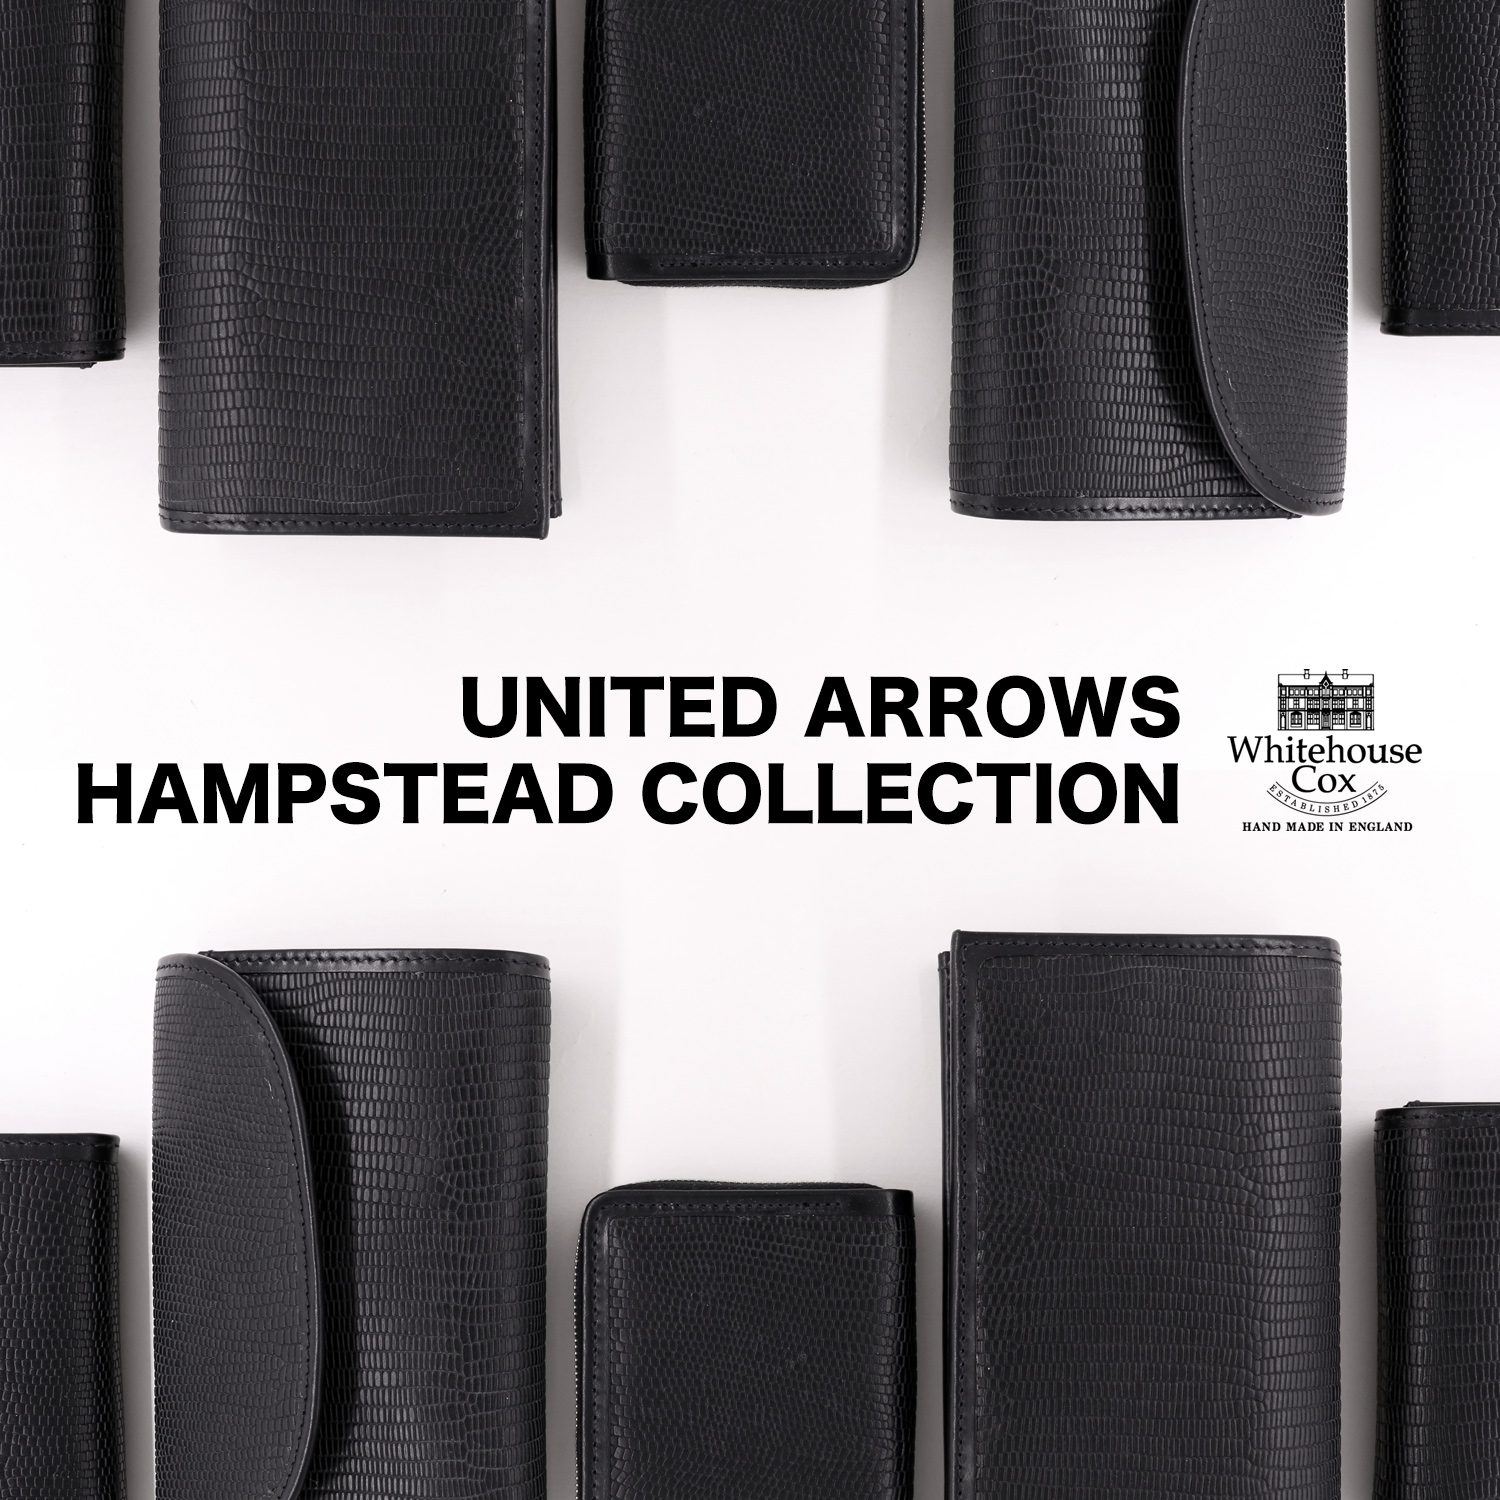 Whitehouse Cox × UNITED ARROWS HAMPSTEAD COLLECTION